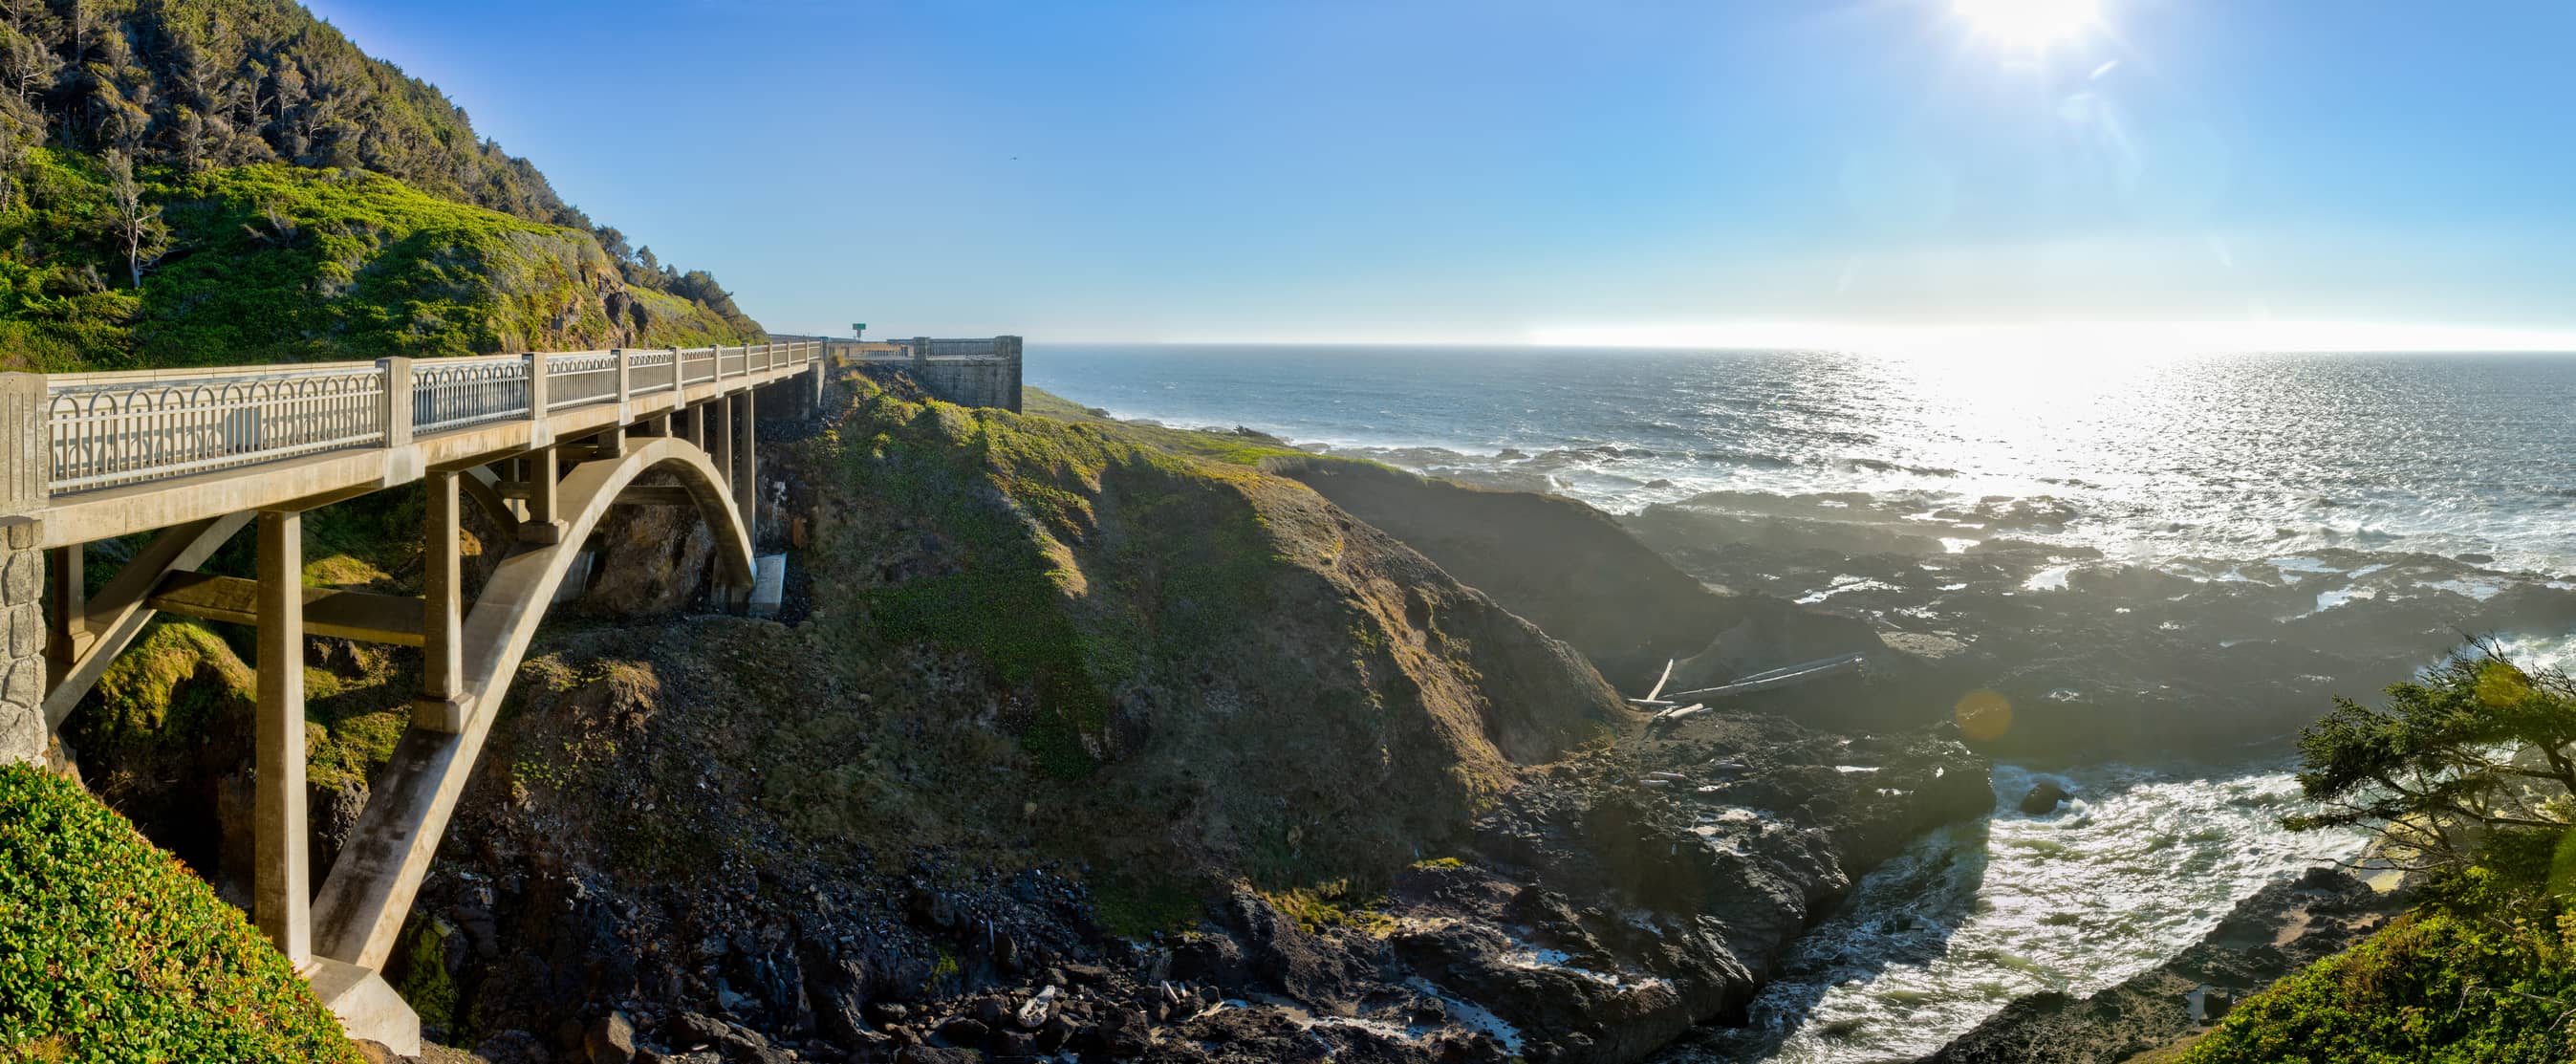 Panoramic View of the Oregon Coast Line at Cook's Chasm